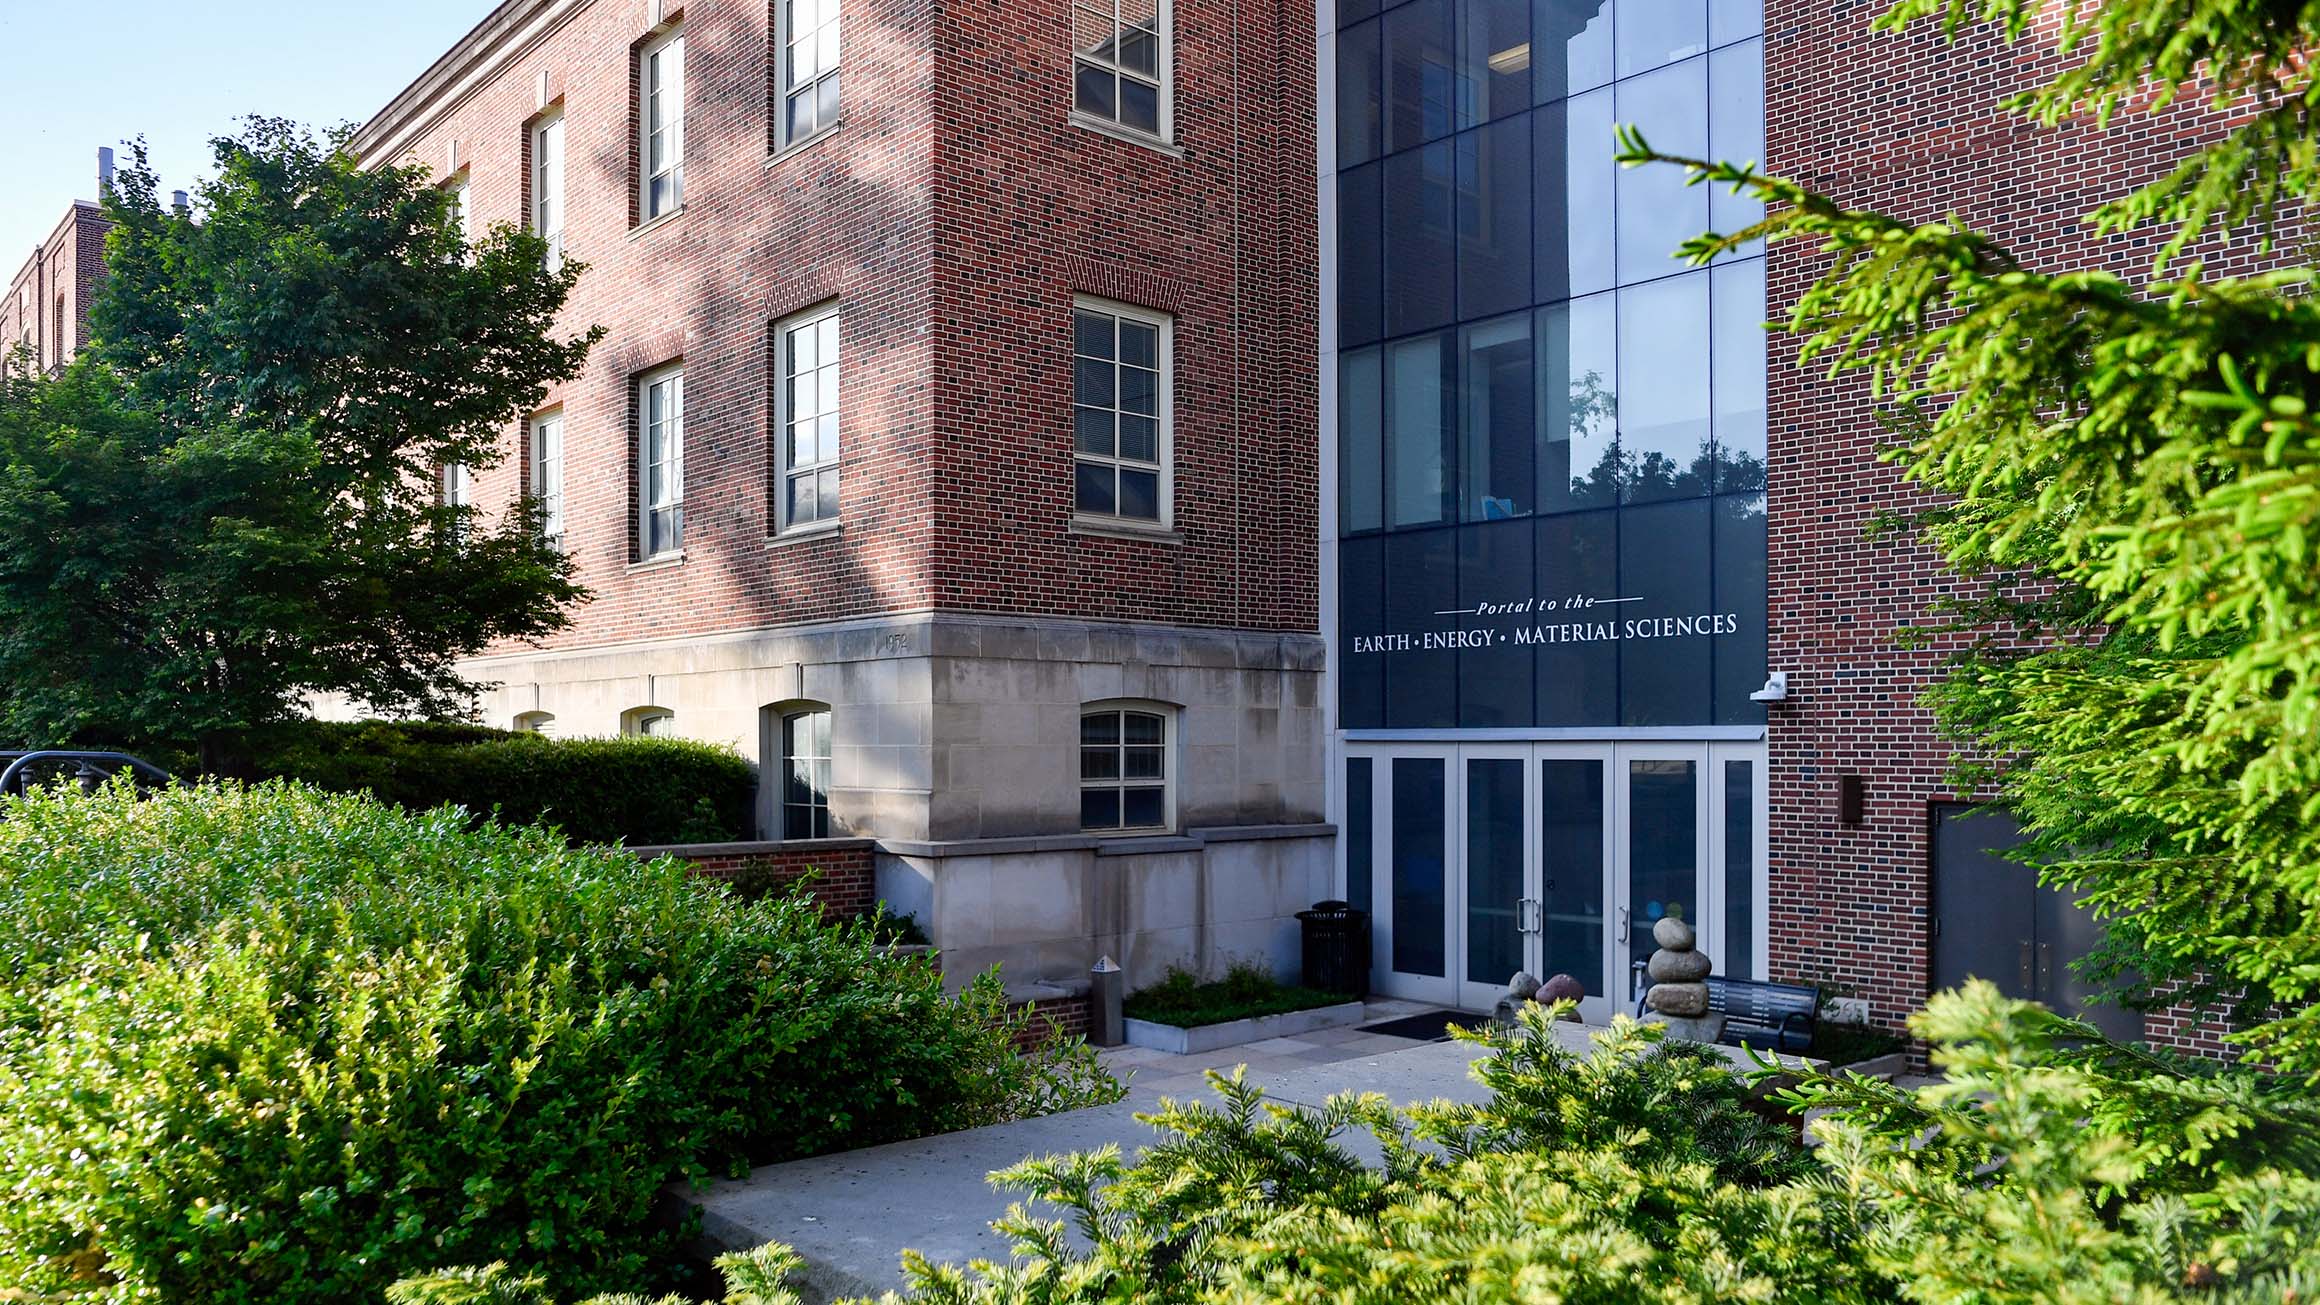 The doorway to the Deike Building at Penn State's University Park campus is shown.